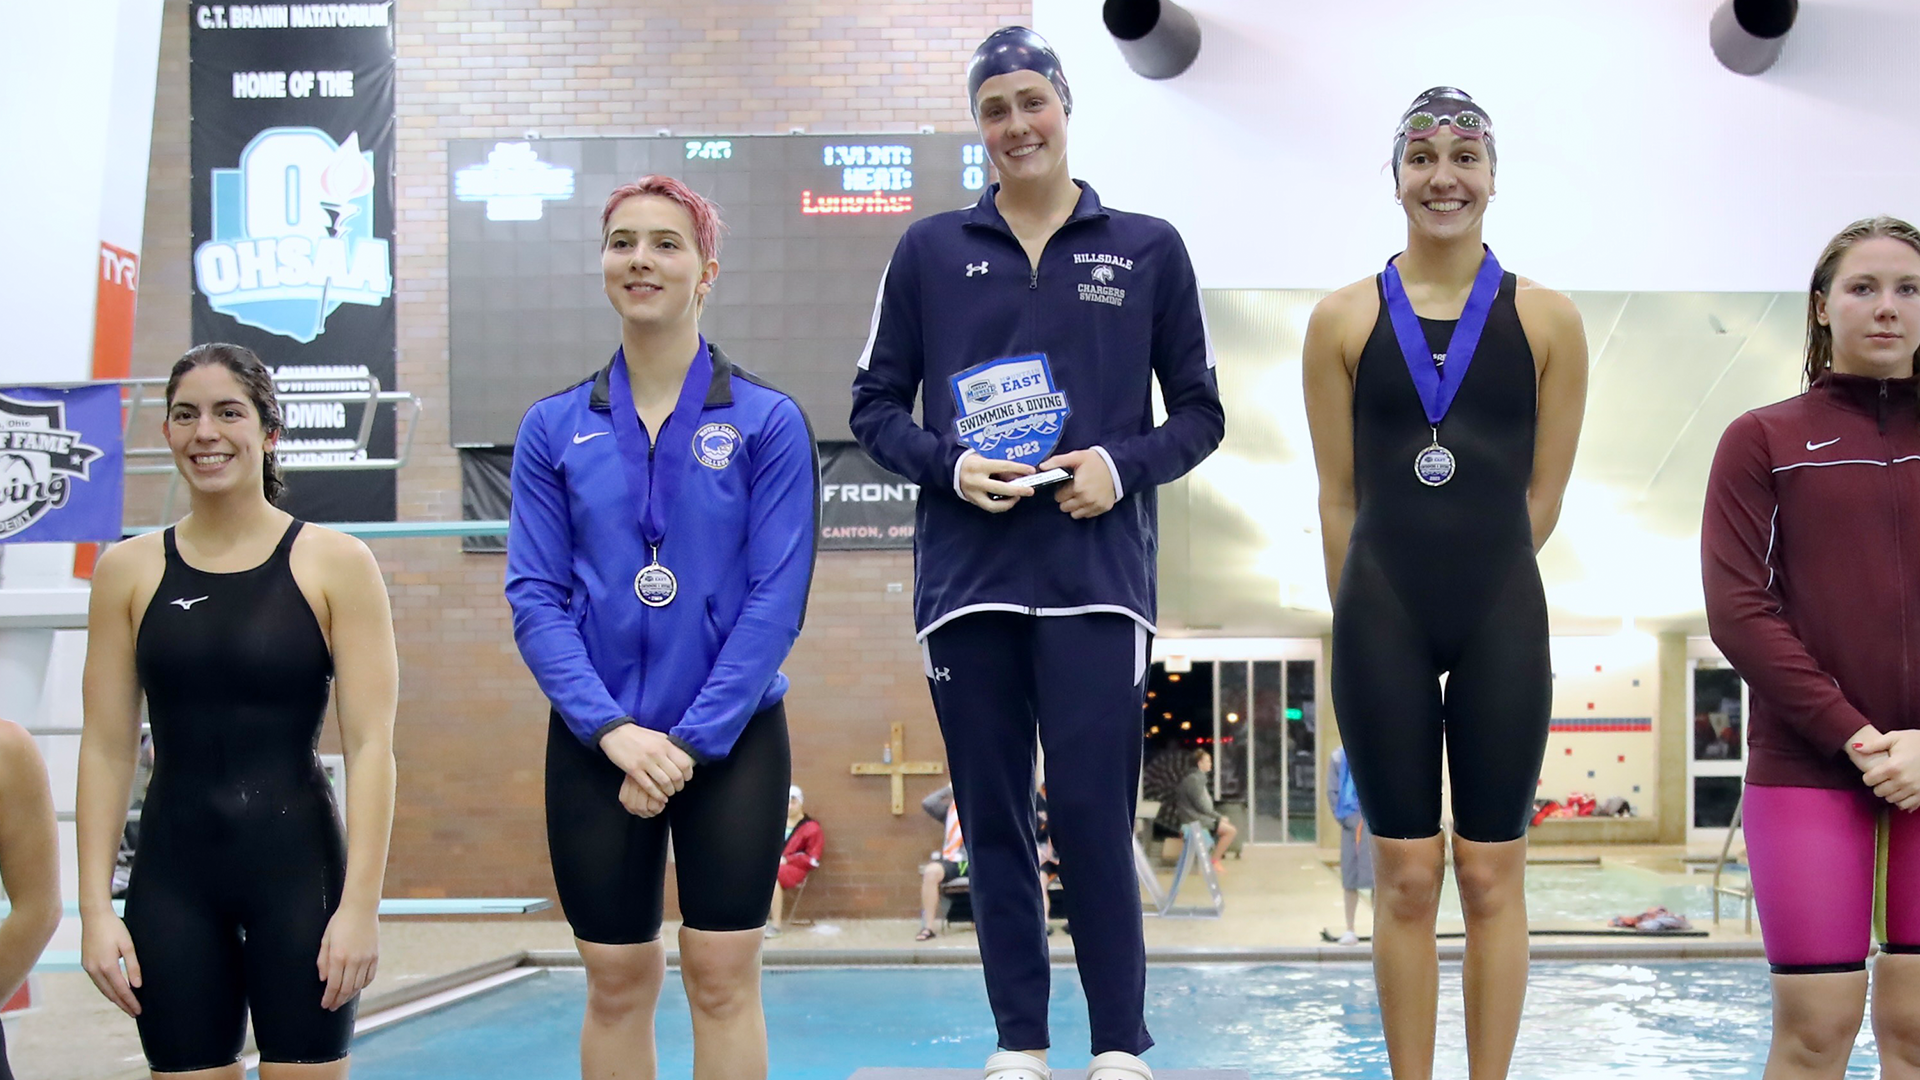 Mason wins 500 yd freestyle title to highlight Day 3 of G-MAC/MEC Championships